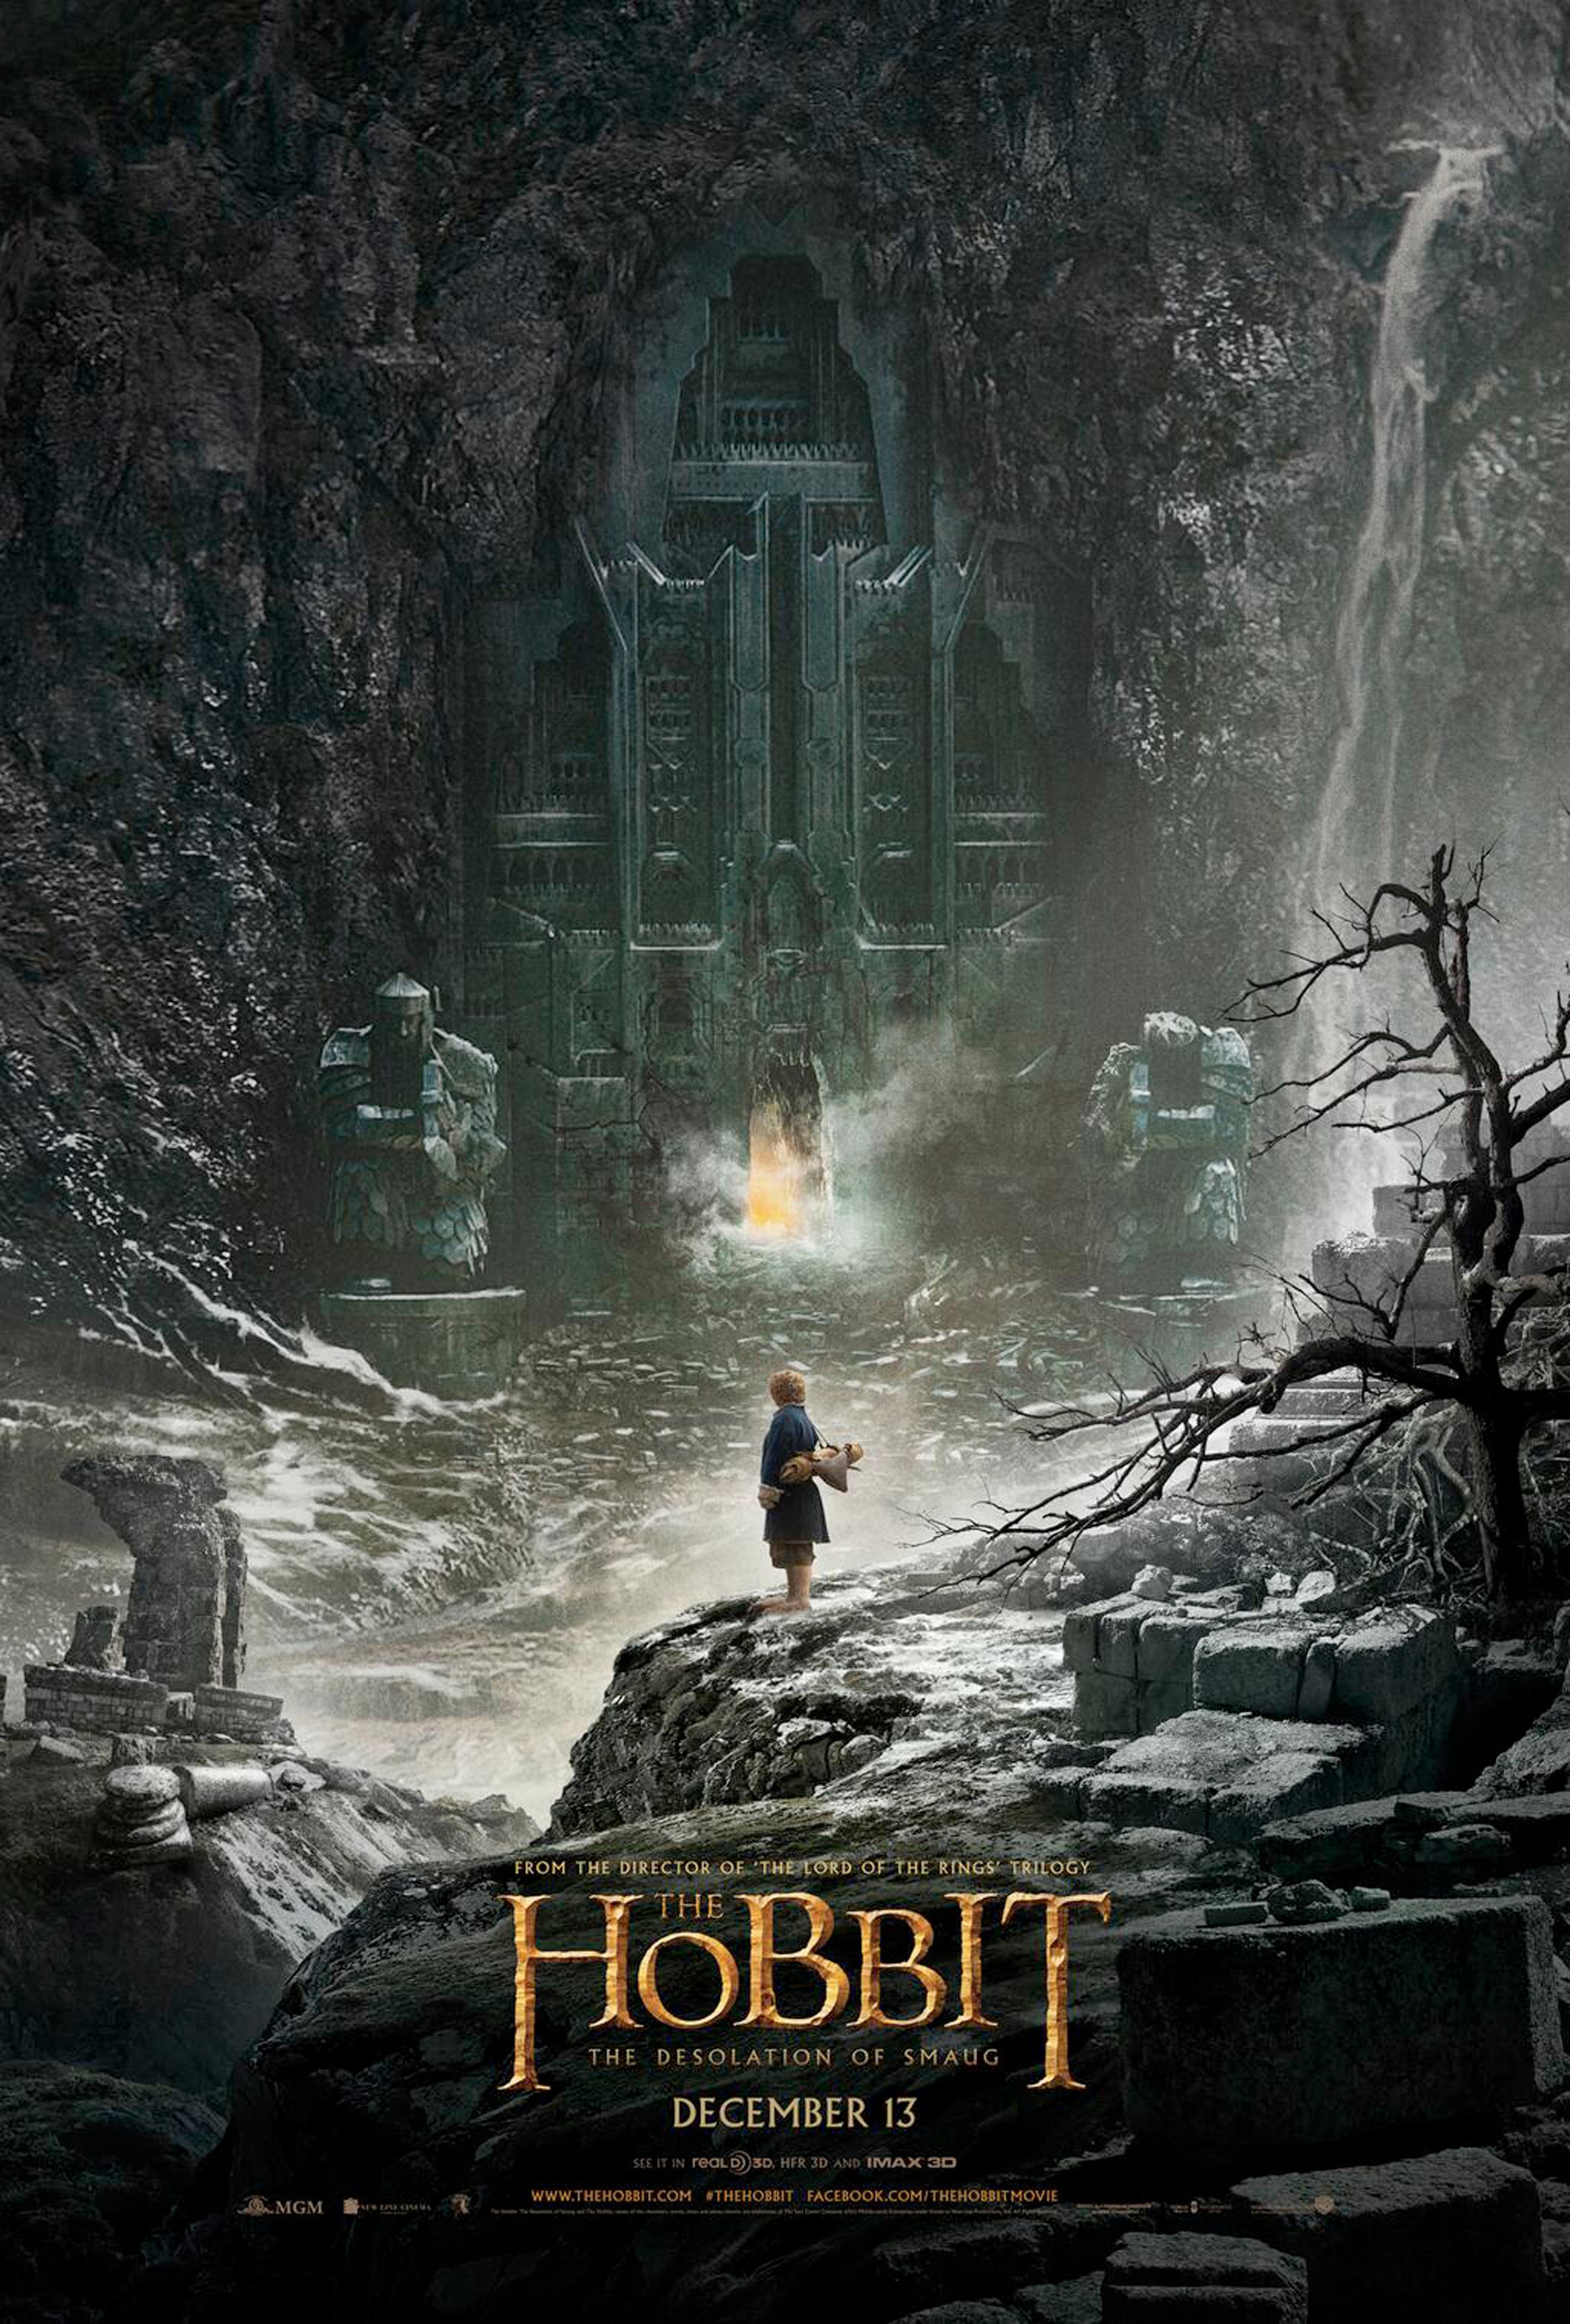 The Hobbit: The Desolation of Smaug poster has been revealed online. The film is due to be released in December 2013.